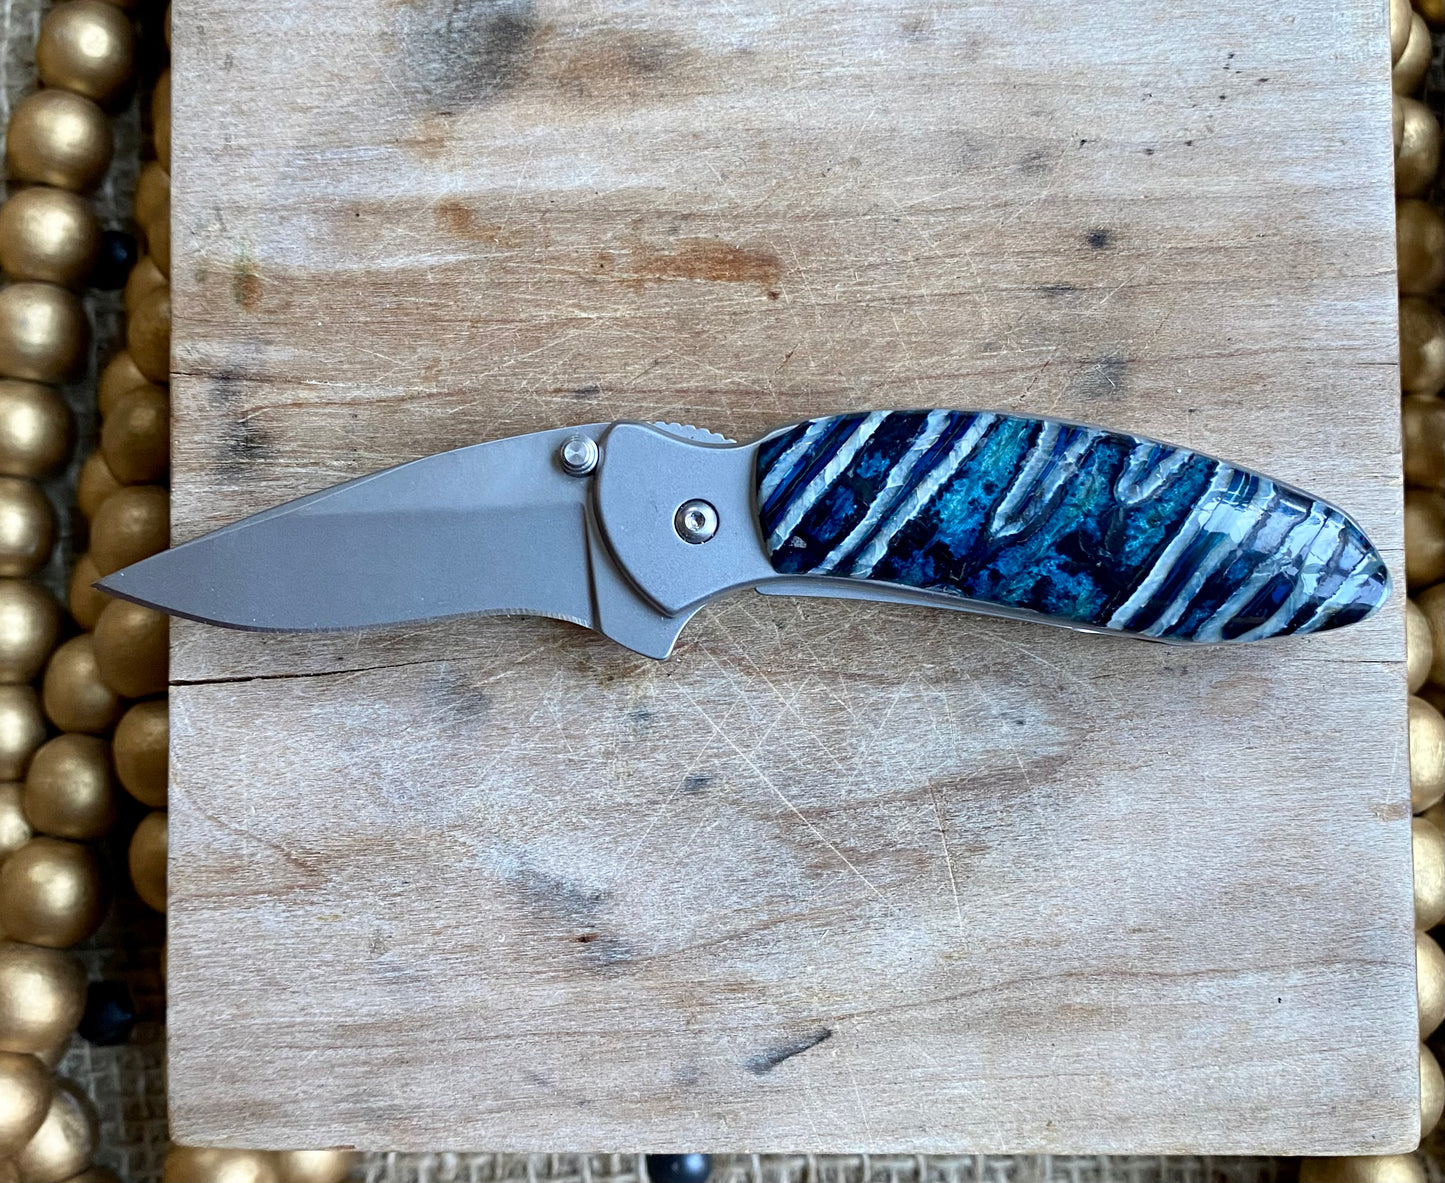 Kershaw Chive Mammoth Tooth Pocket Knife